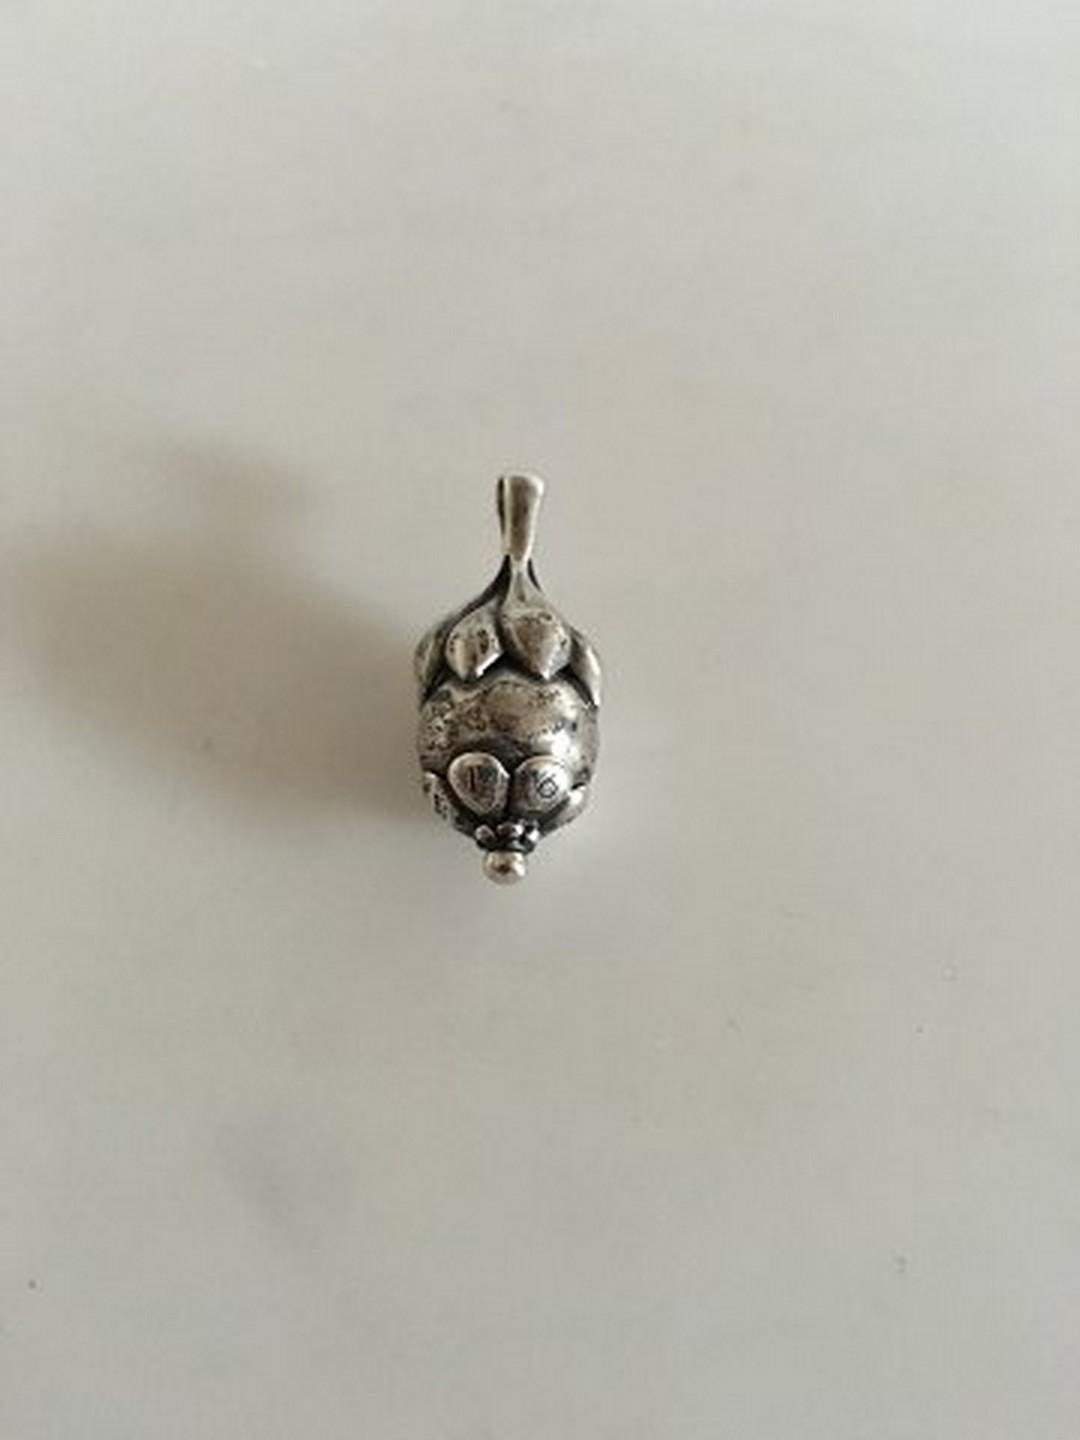 Georg Jensen Sterling Silver Annual pendant 1991. Measures 3.2 cm / 1 17/64 in. Weighs 8.5 g / 0.30 oz.